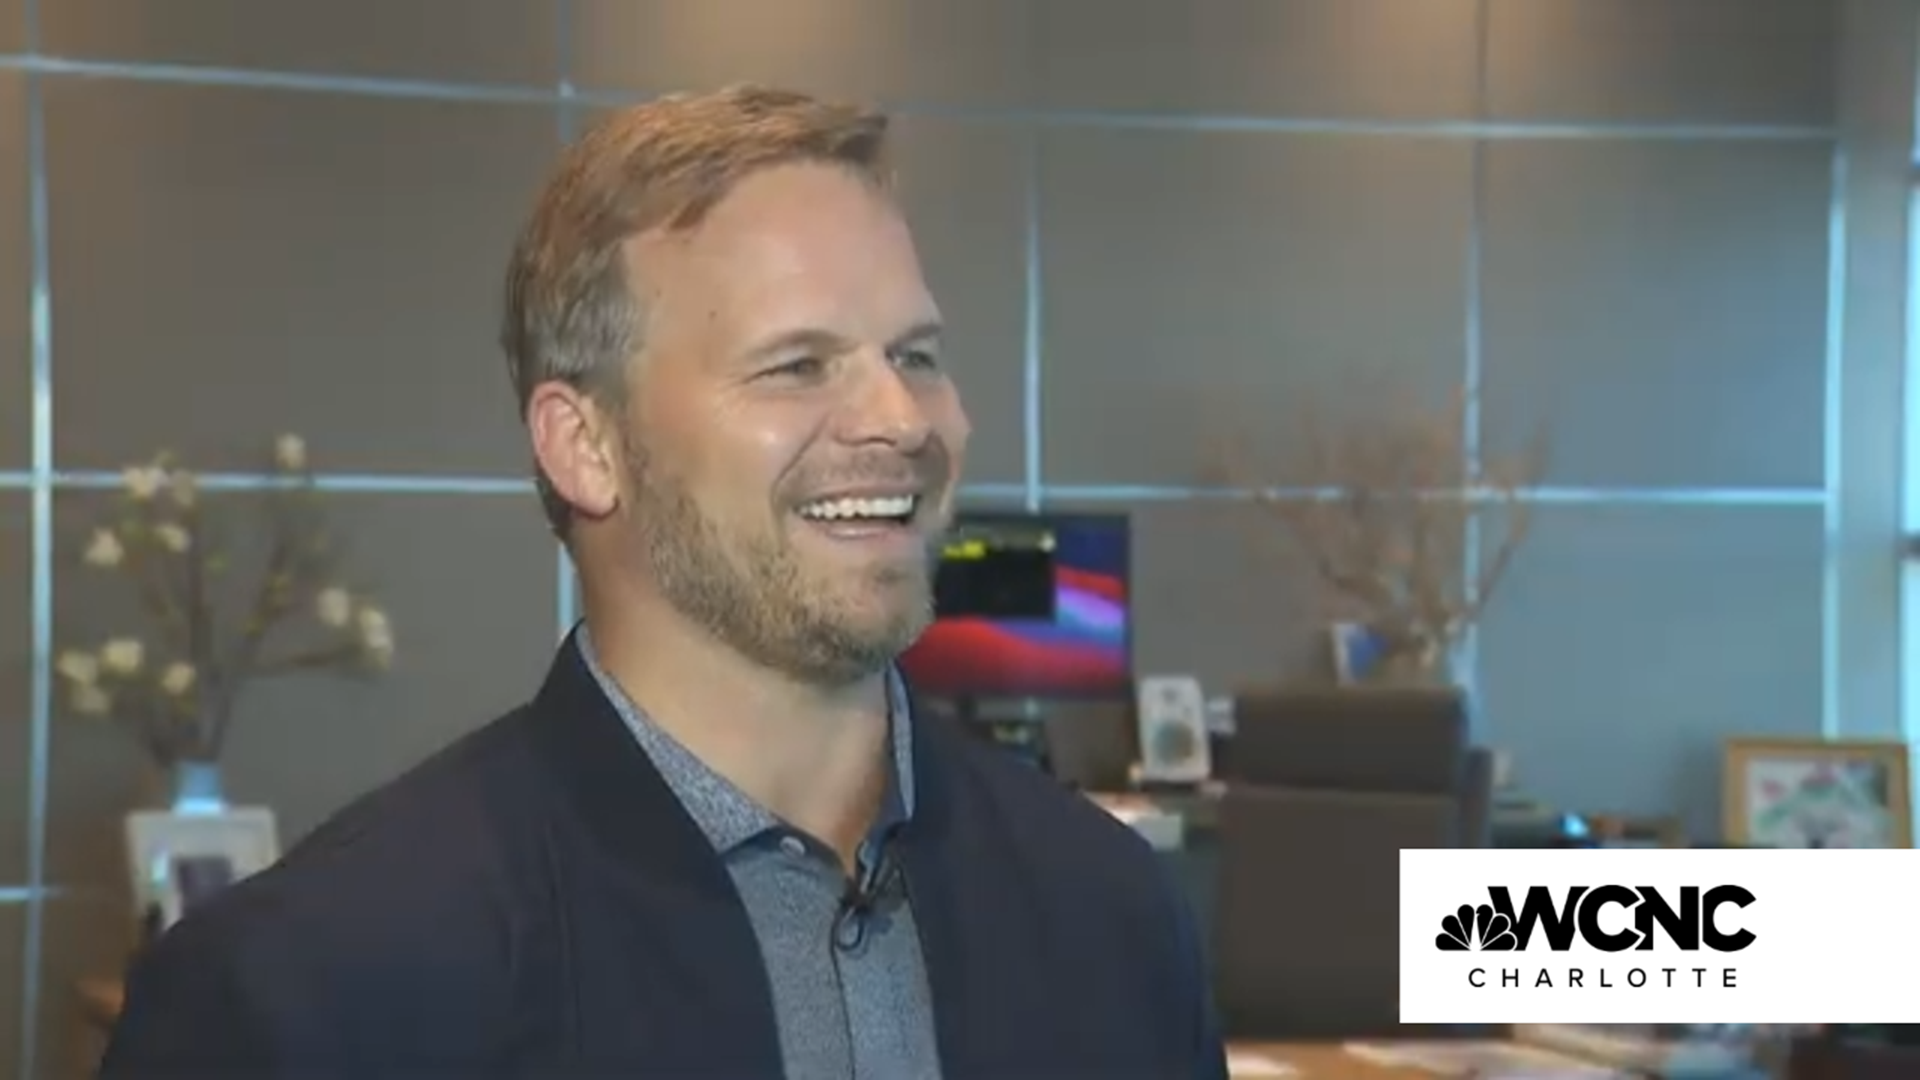 As the NASCAR Playoffs return to the Charlotte Motor Speedway's ROVAL for the Bank of America 400, Marcus Smith chats with WCNC Charlotte's Nick Carboni.